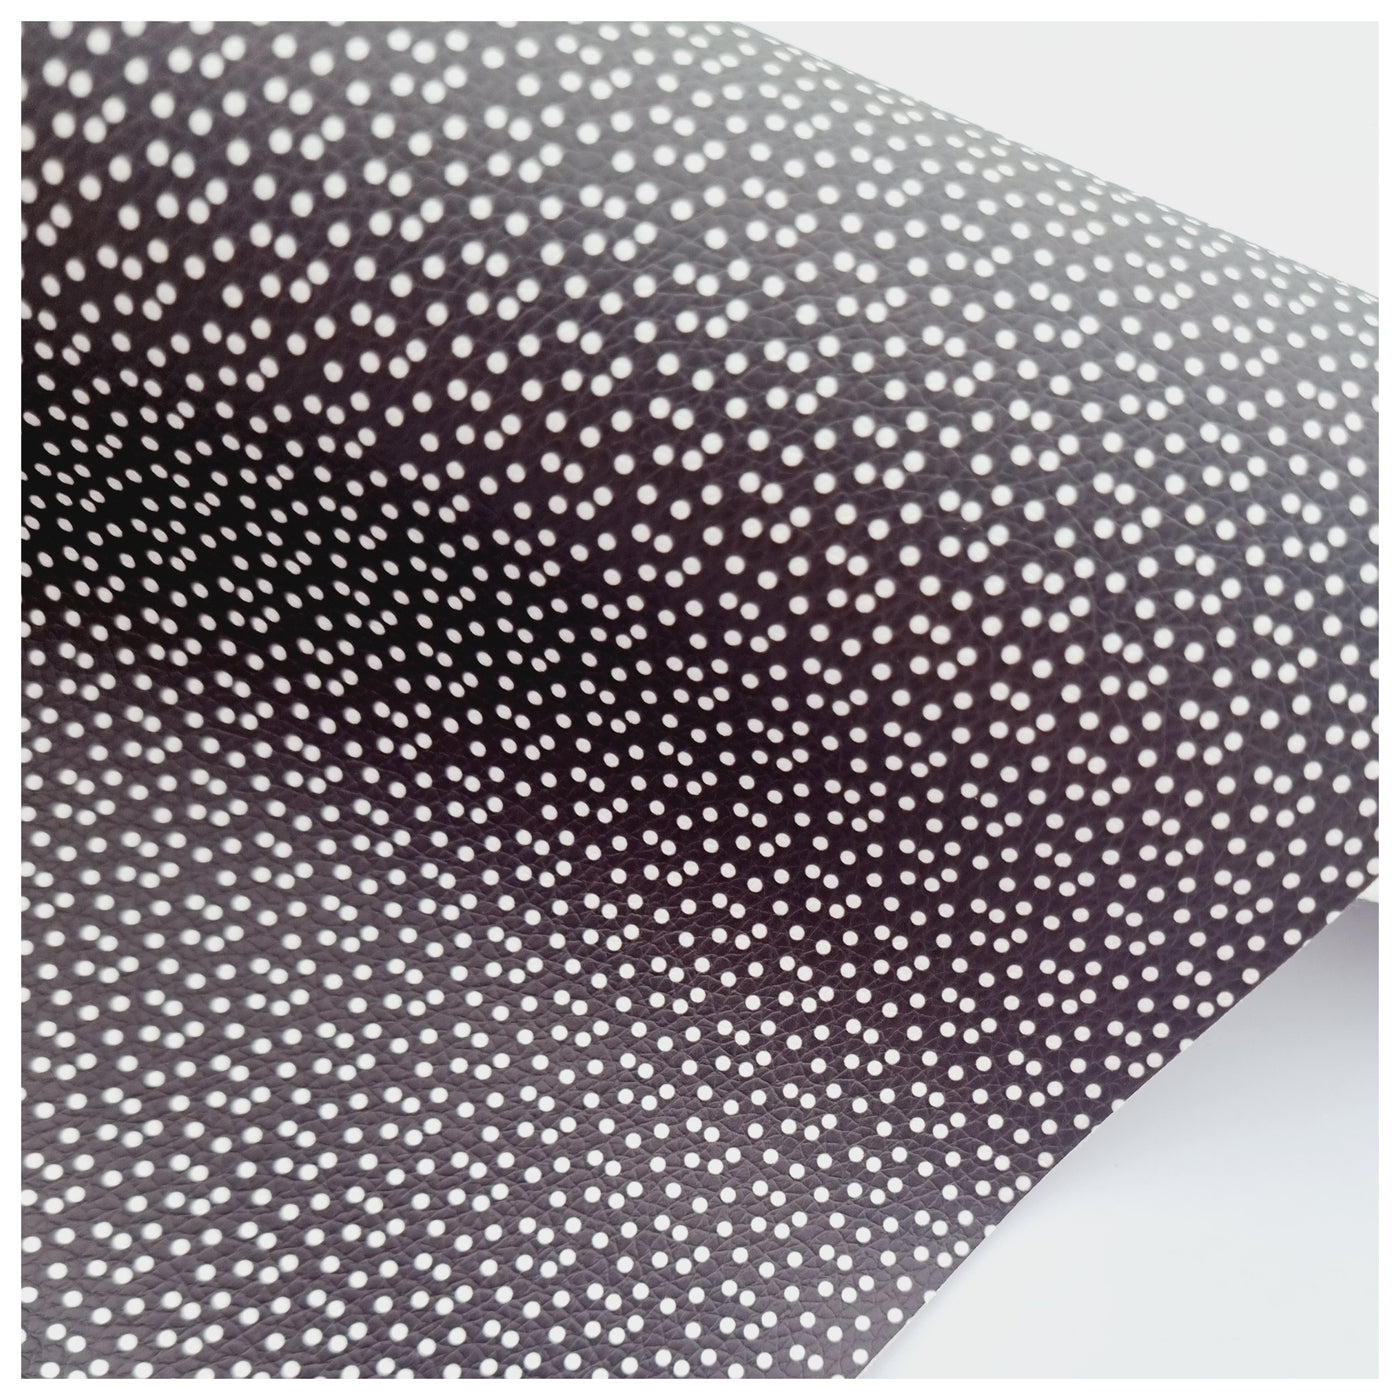 A4 Sheet of White Confetti Dots on Black Litchi Leather